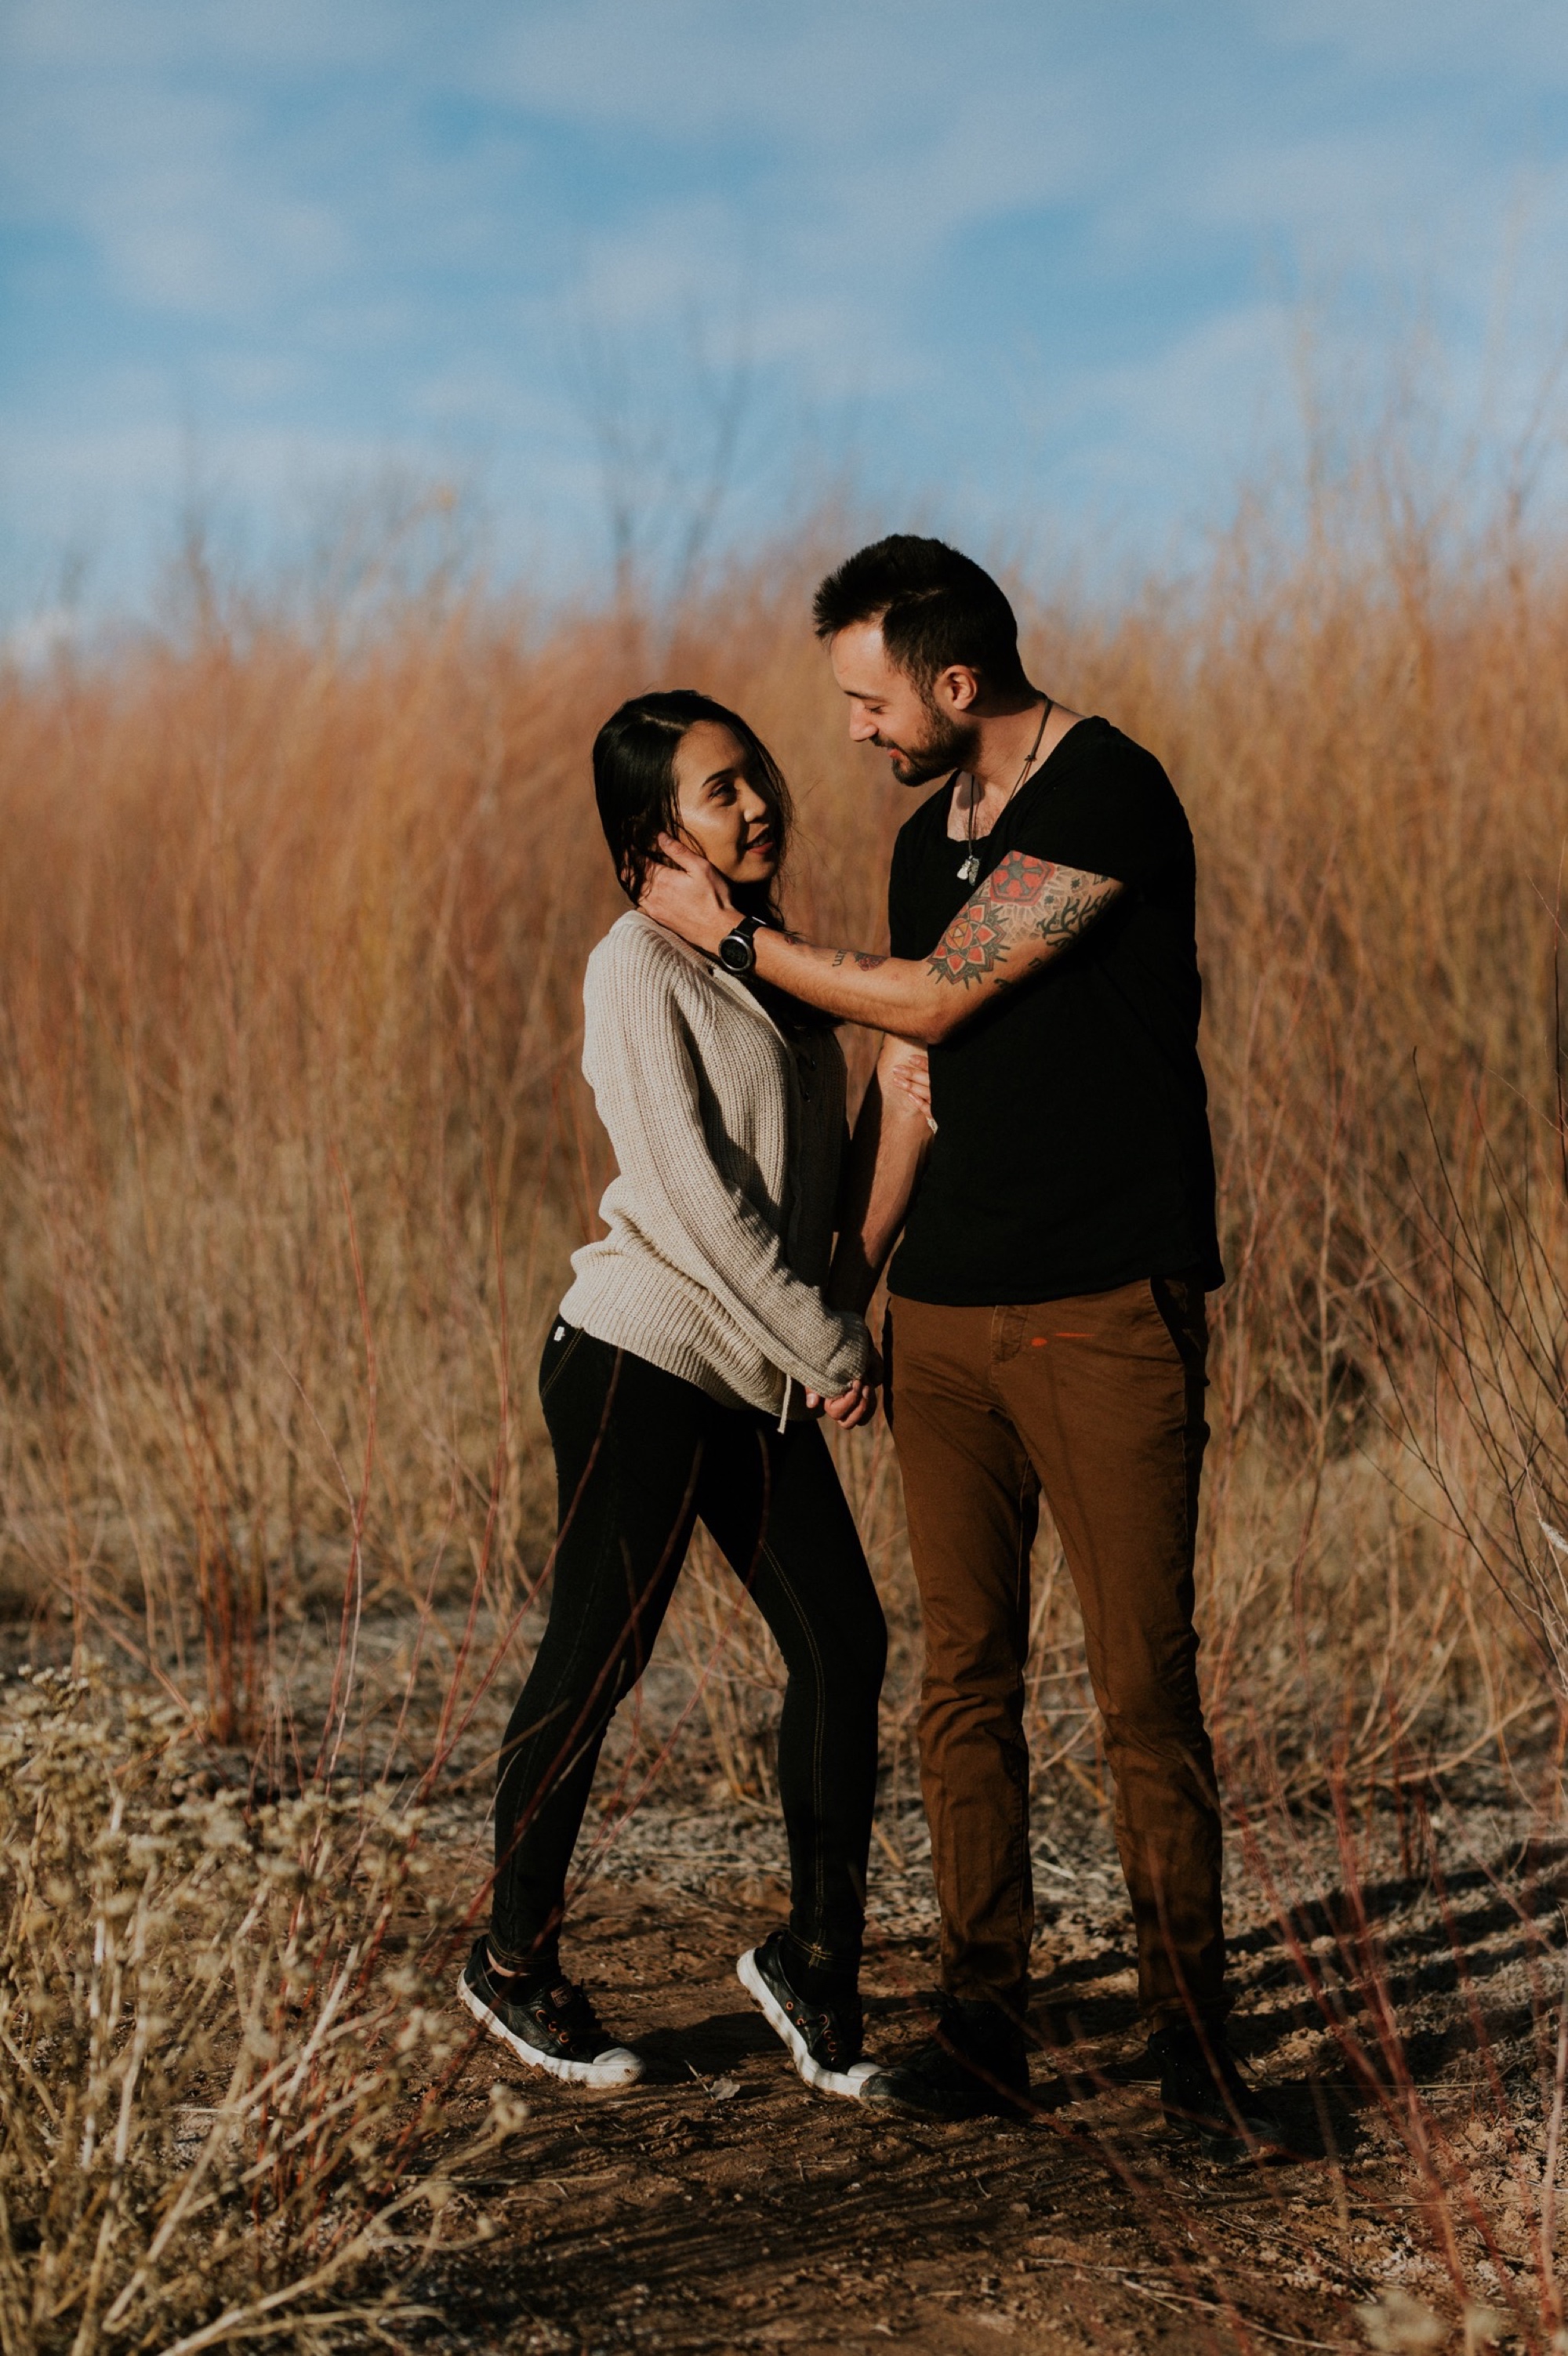  I loved working with Xamie and Nate on this incredible couples portrait session at the Alameda Bosque Open Space in Albuquerque, New Mexico. Our session started off with grey overcast skies that made for some moody portraits! Xamie and Nate’s outfit